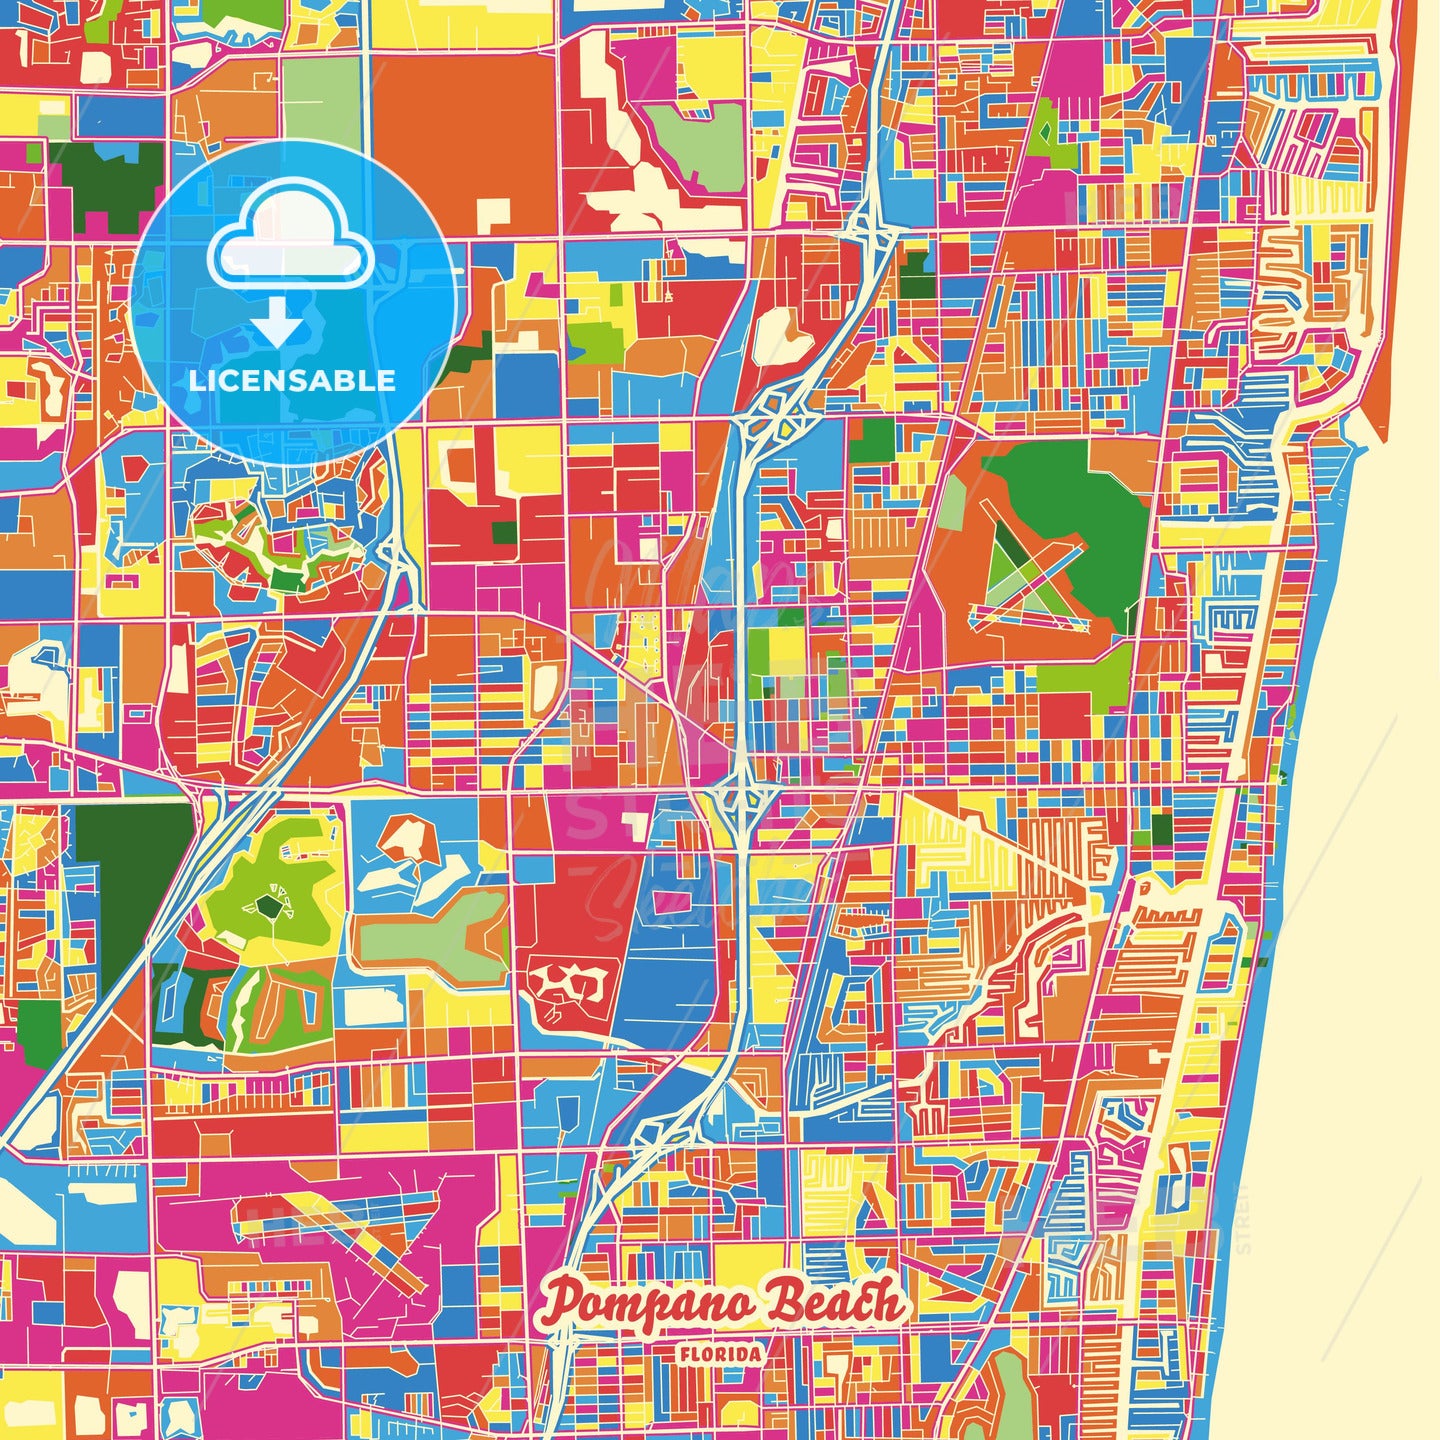 Pompano Beach, United States Crazy Colorful Street Map Poster Template - HEBSTREITS Sketches